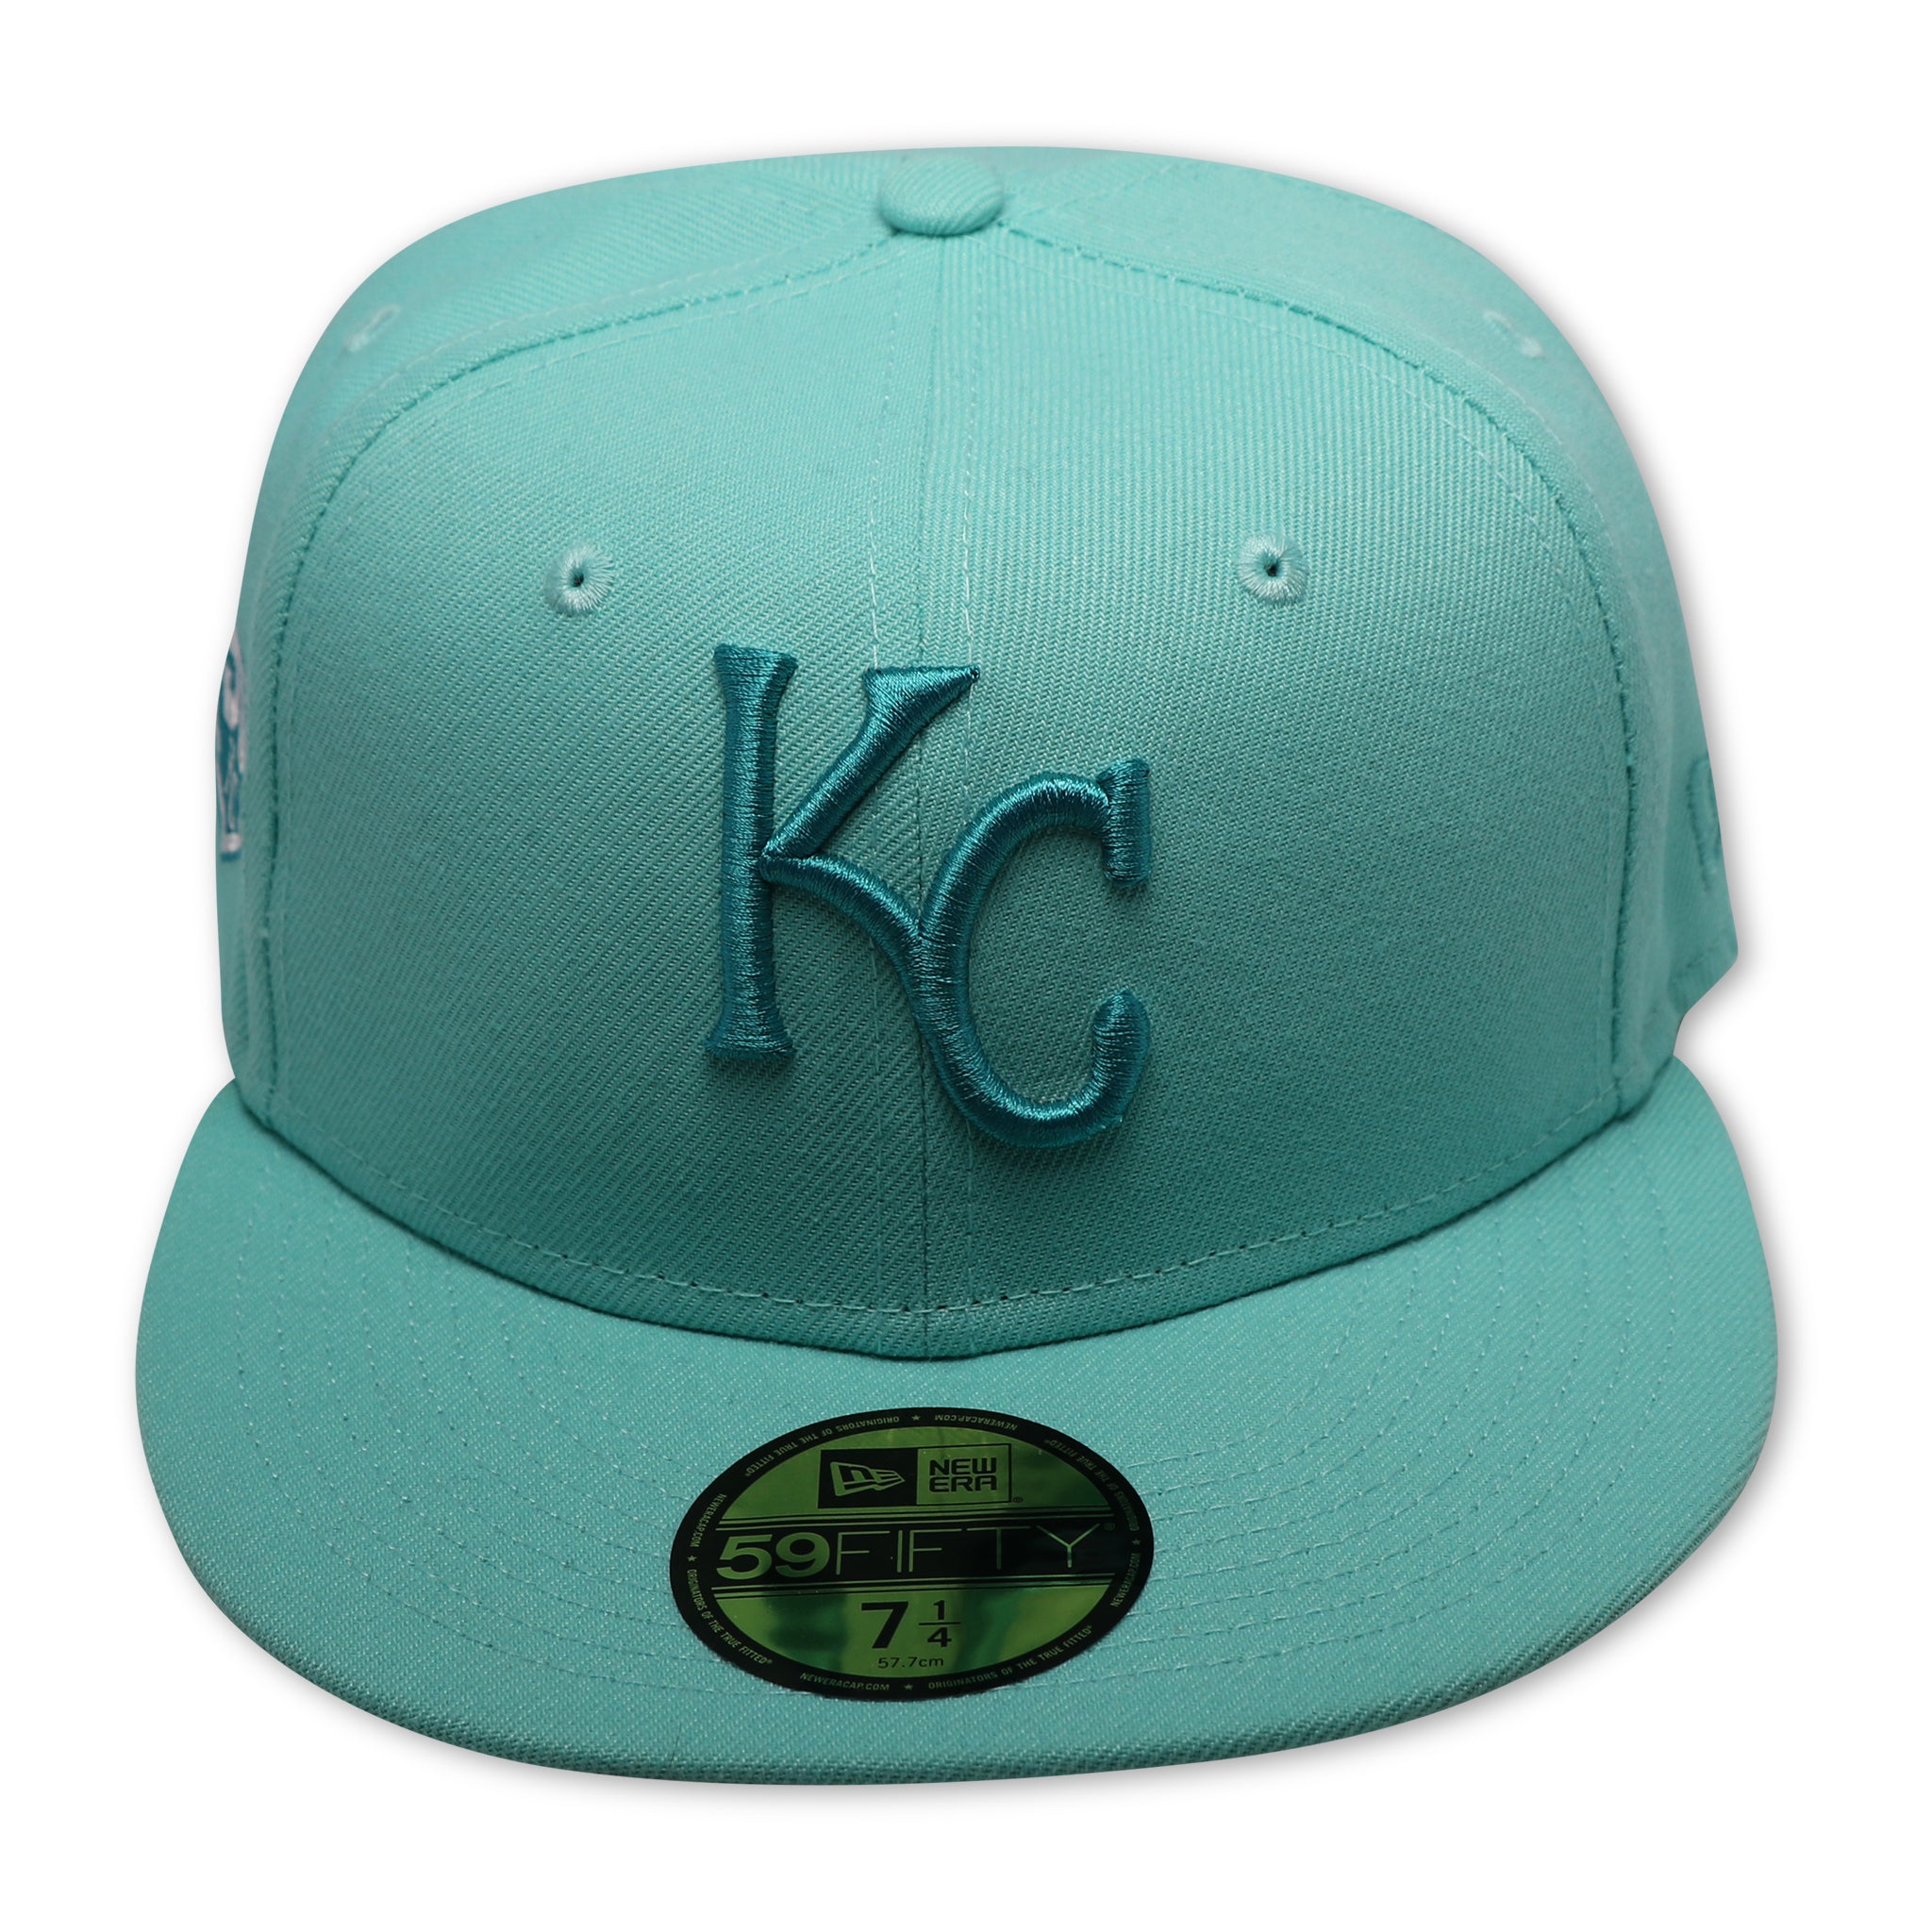 KANSAS CITY ROYALS (TINT) (50 YEARS) NEW ERA 59FIFTY FITTED (GREY UNDER VISOR)